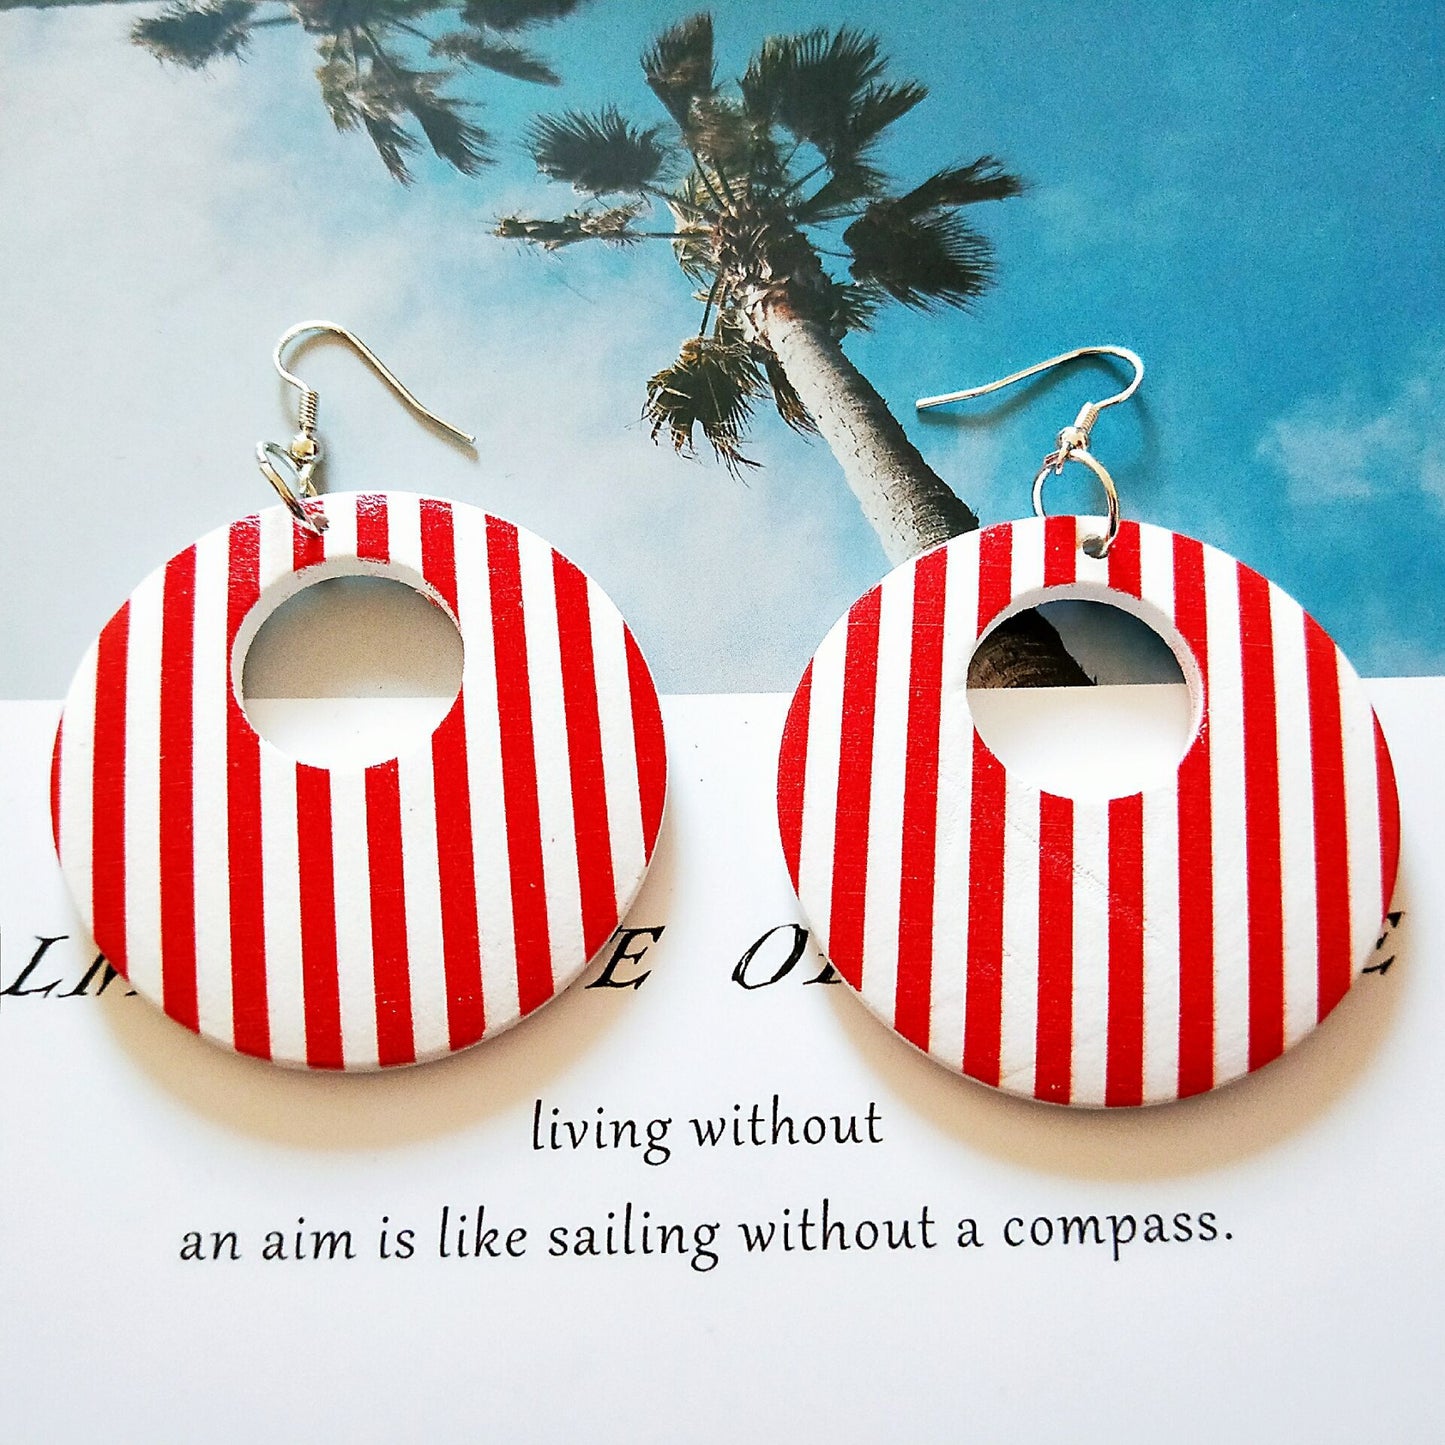 Round Printed Hollow Wooden Earrings South Korea